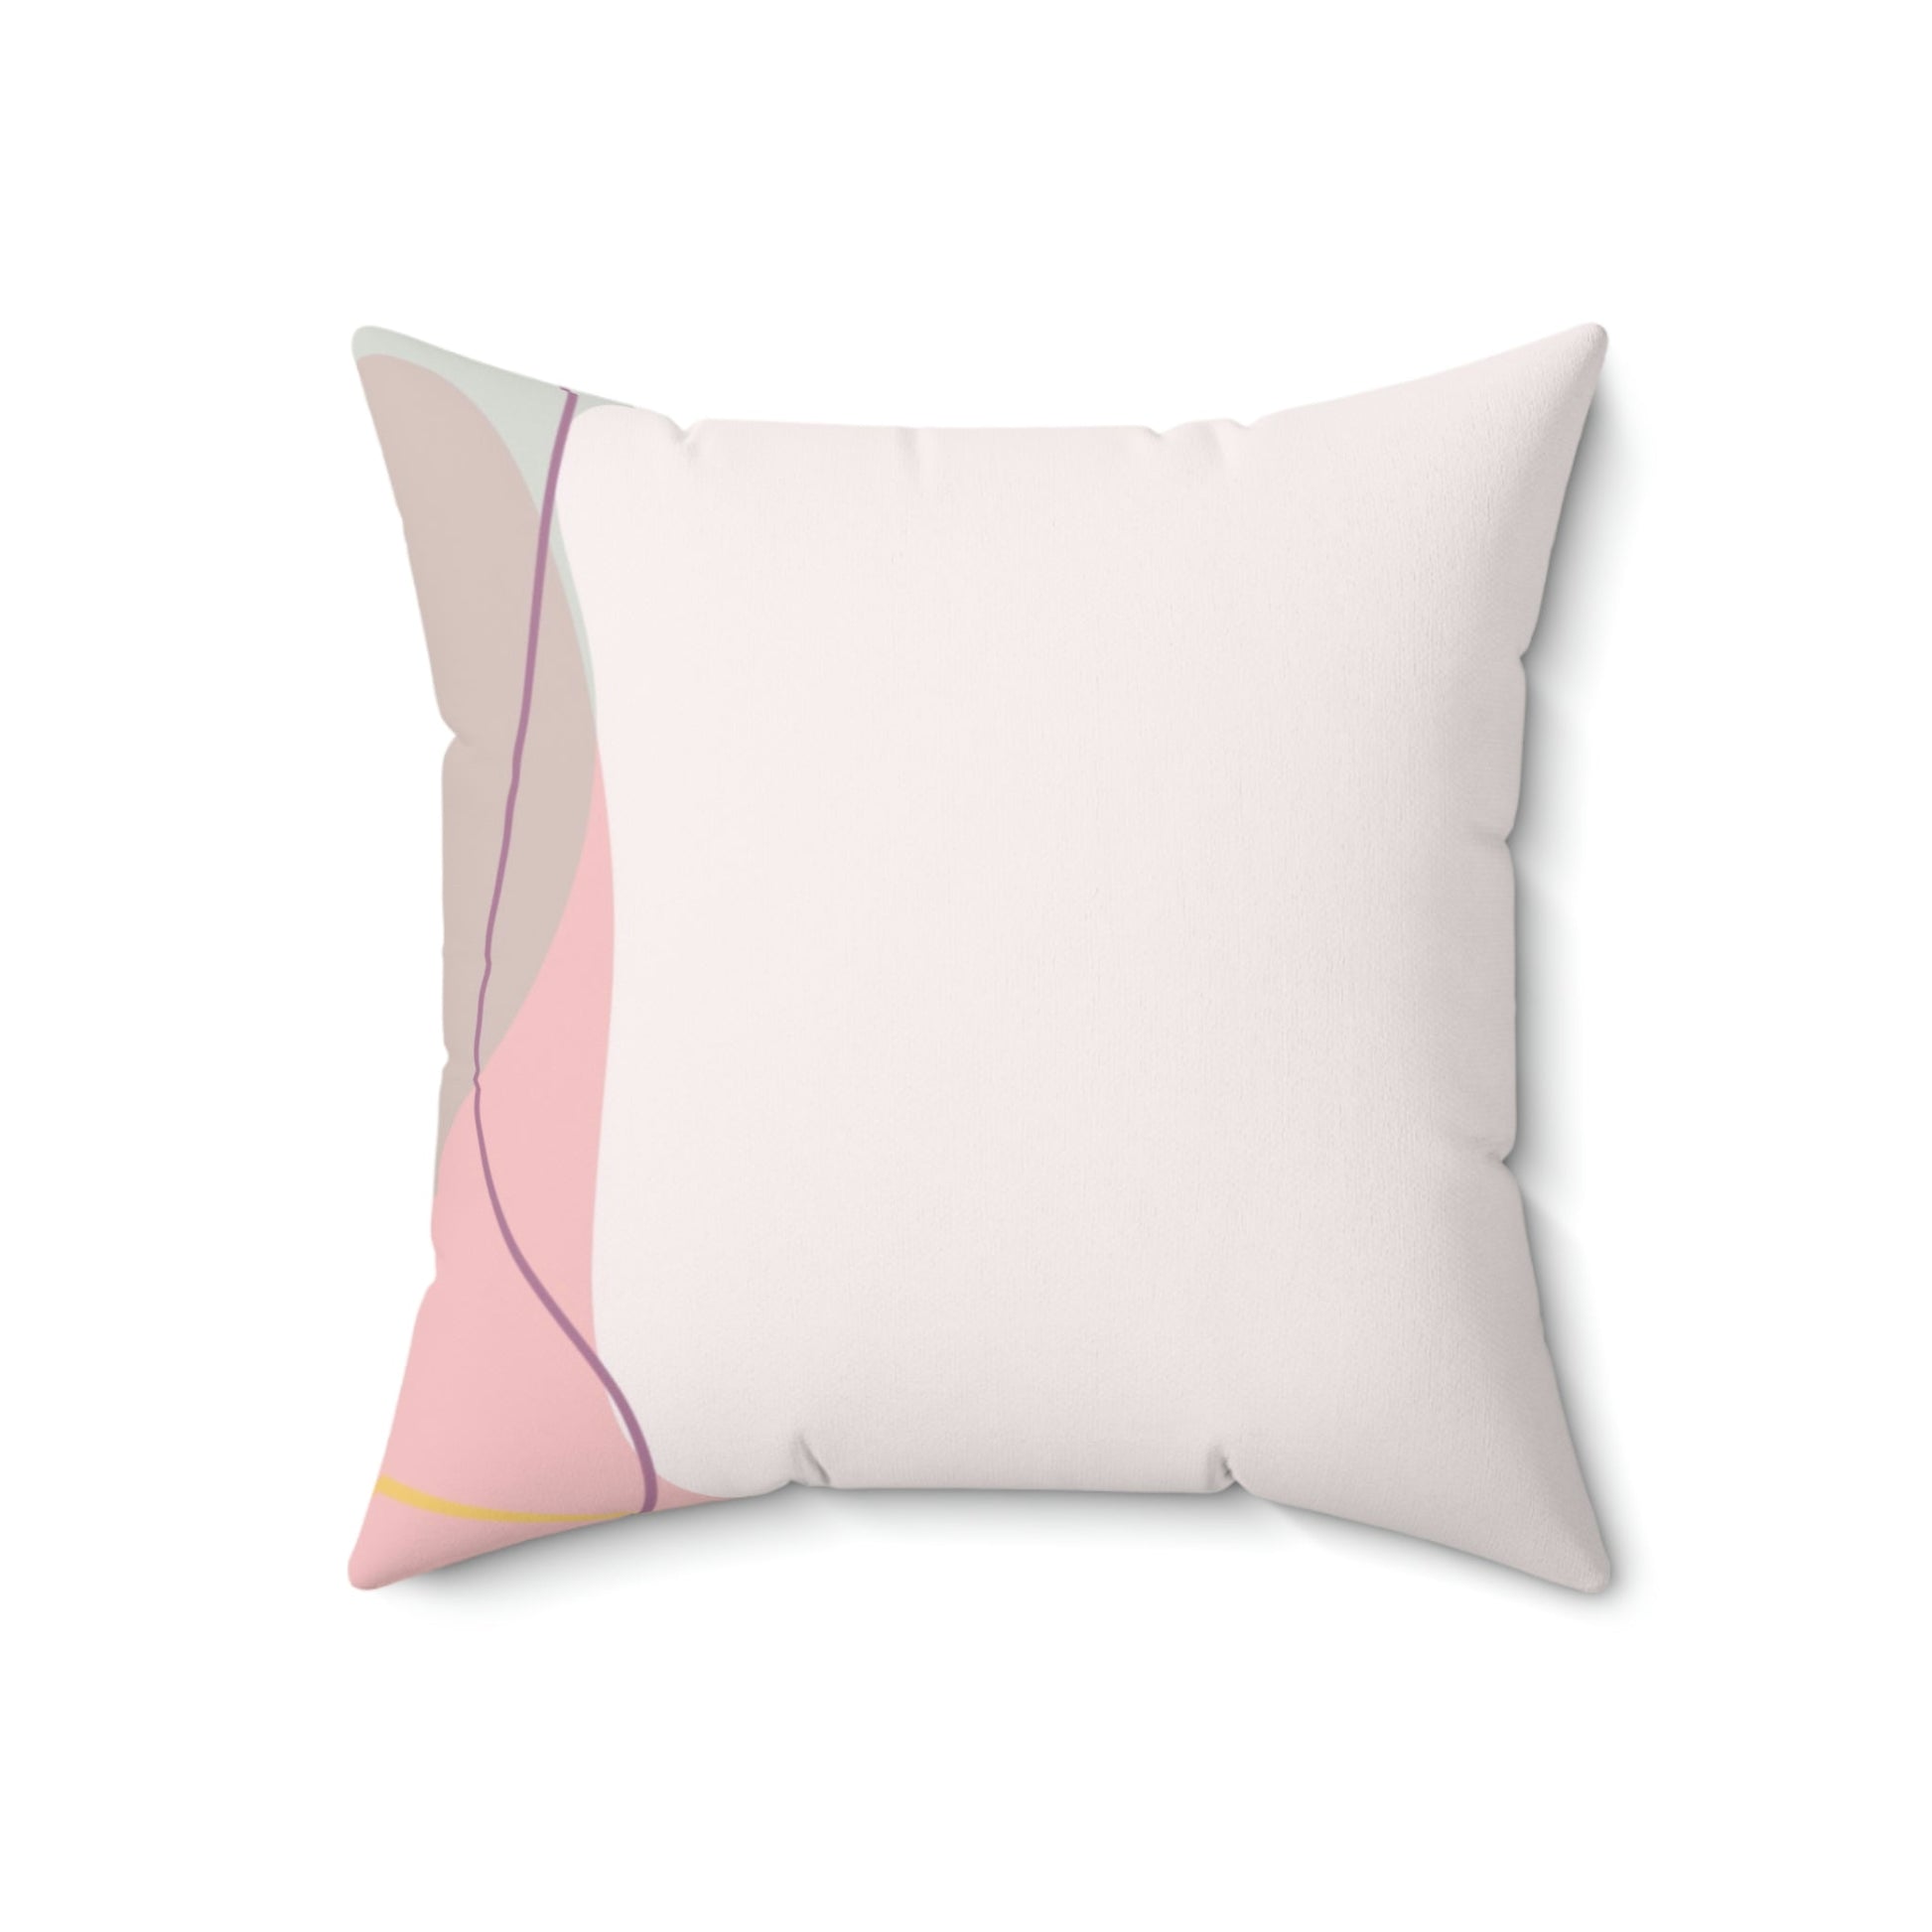 Abstract Square Pillow Home Decor Pink Sweetheart